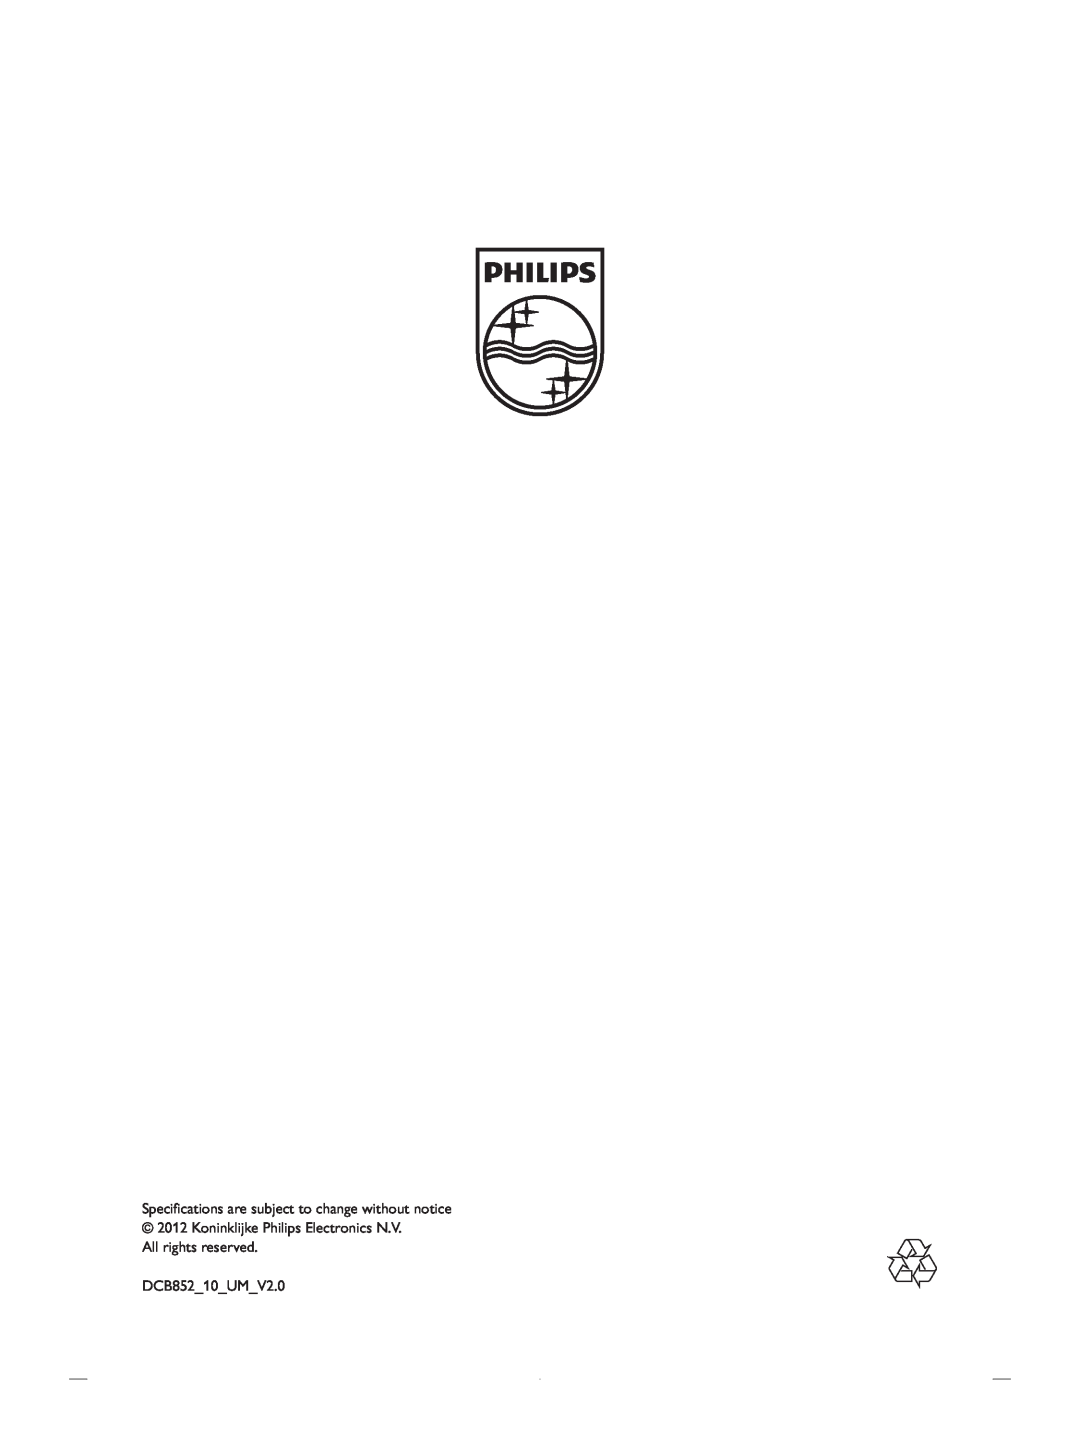 Philips user manual Specifications are subject to change without notice, DCB85210UMV 